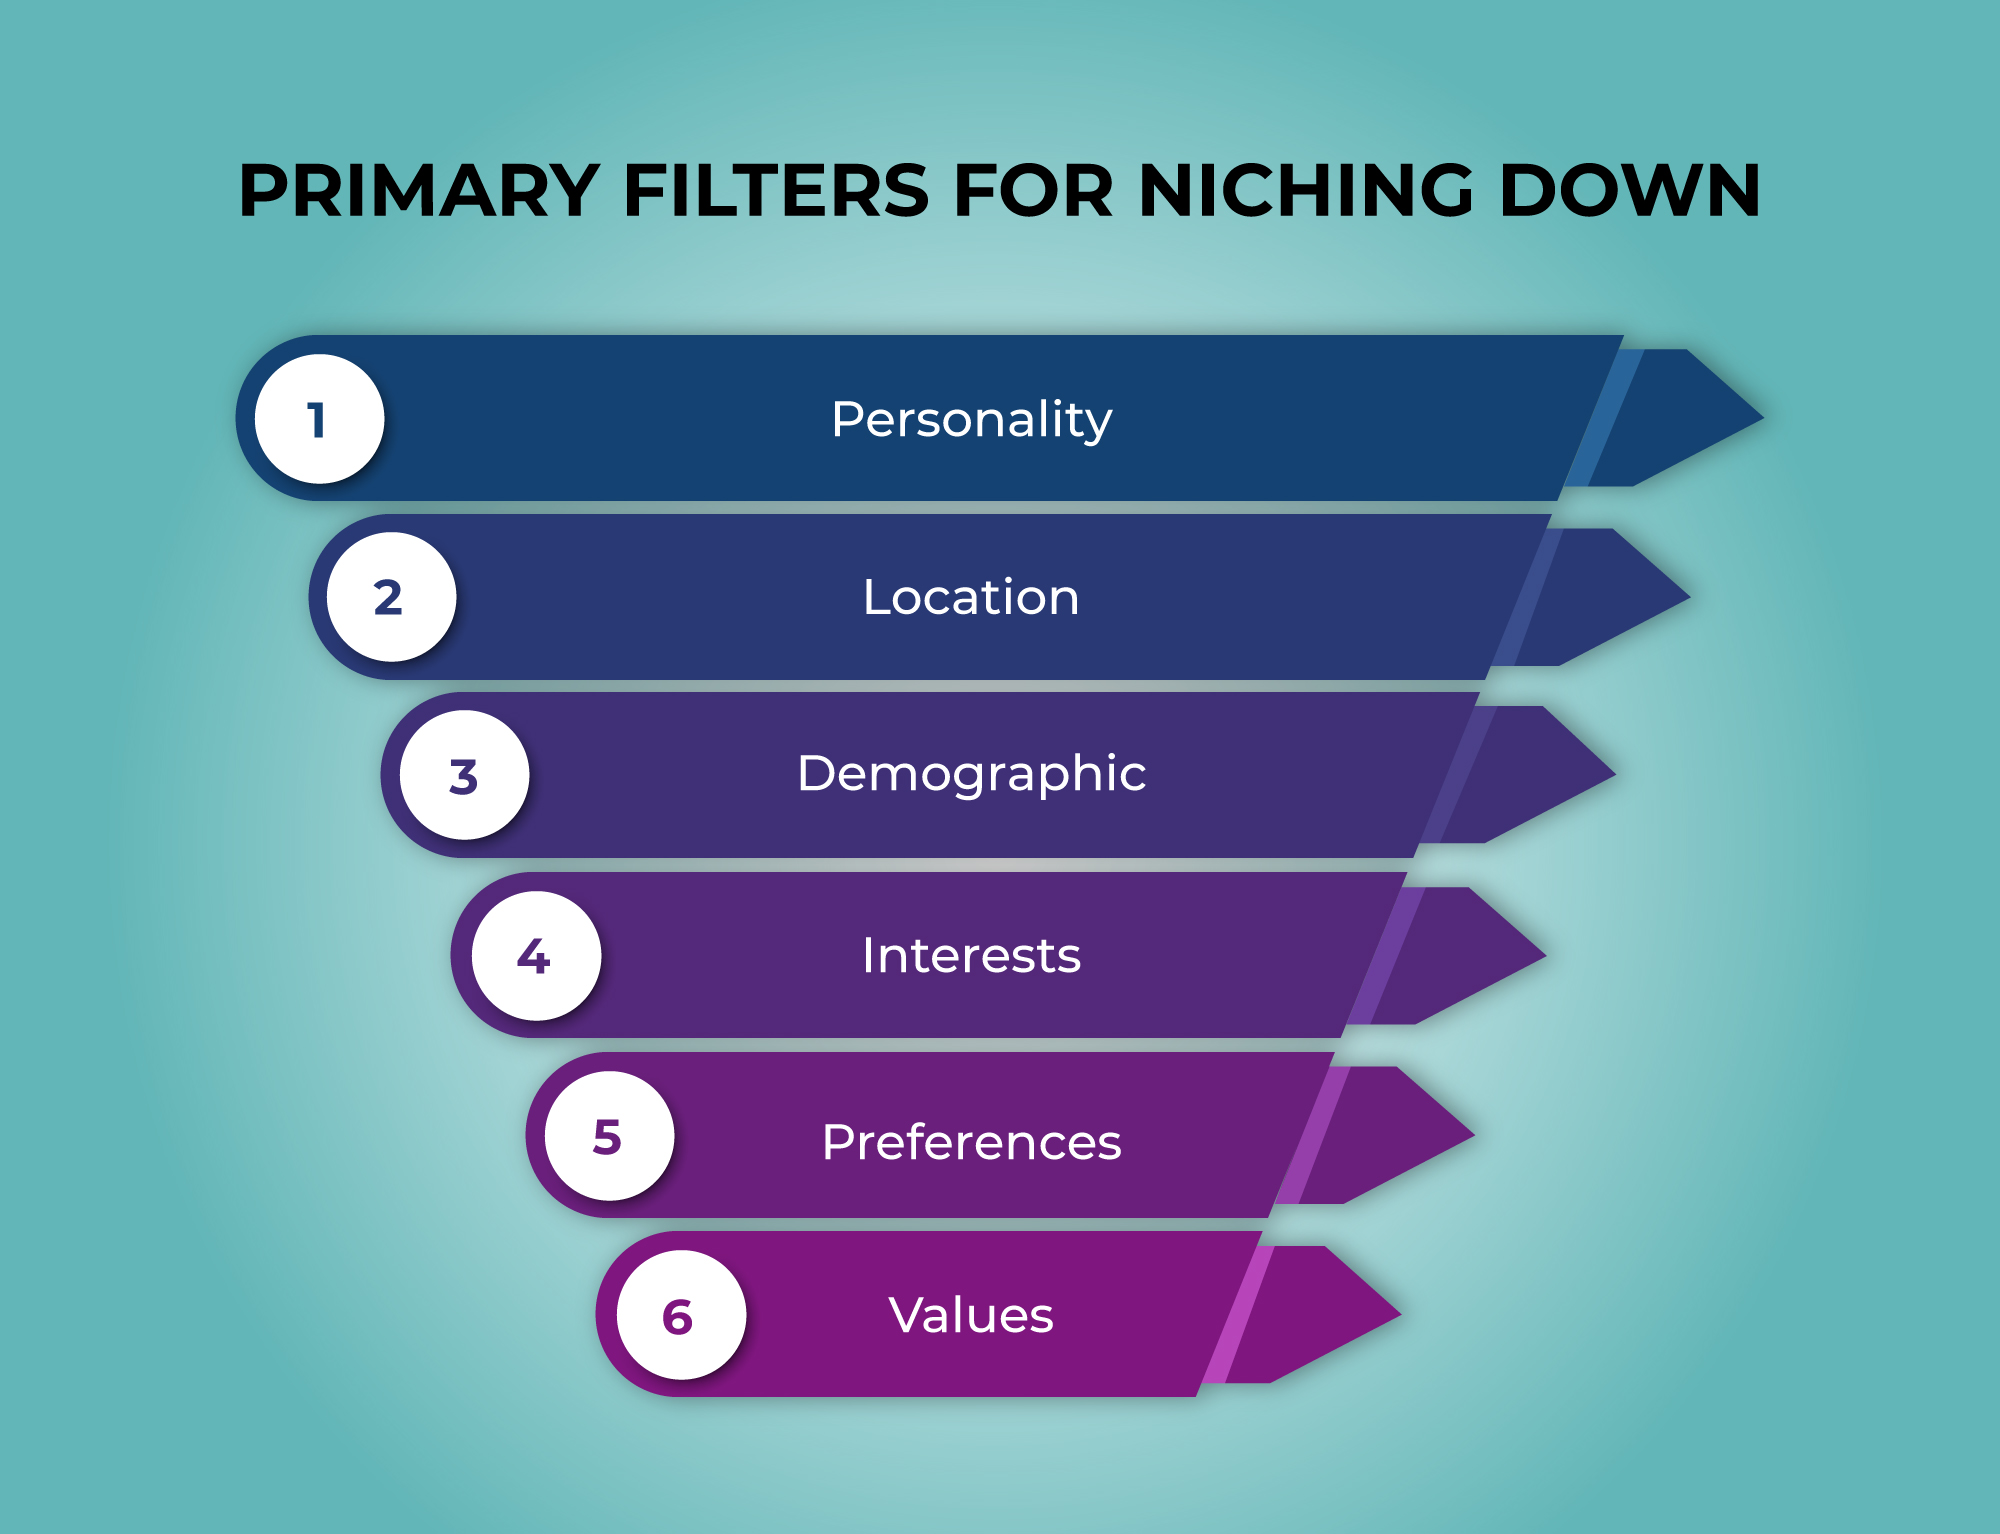 Primary filters for niching down